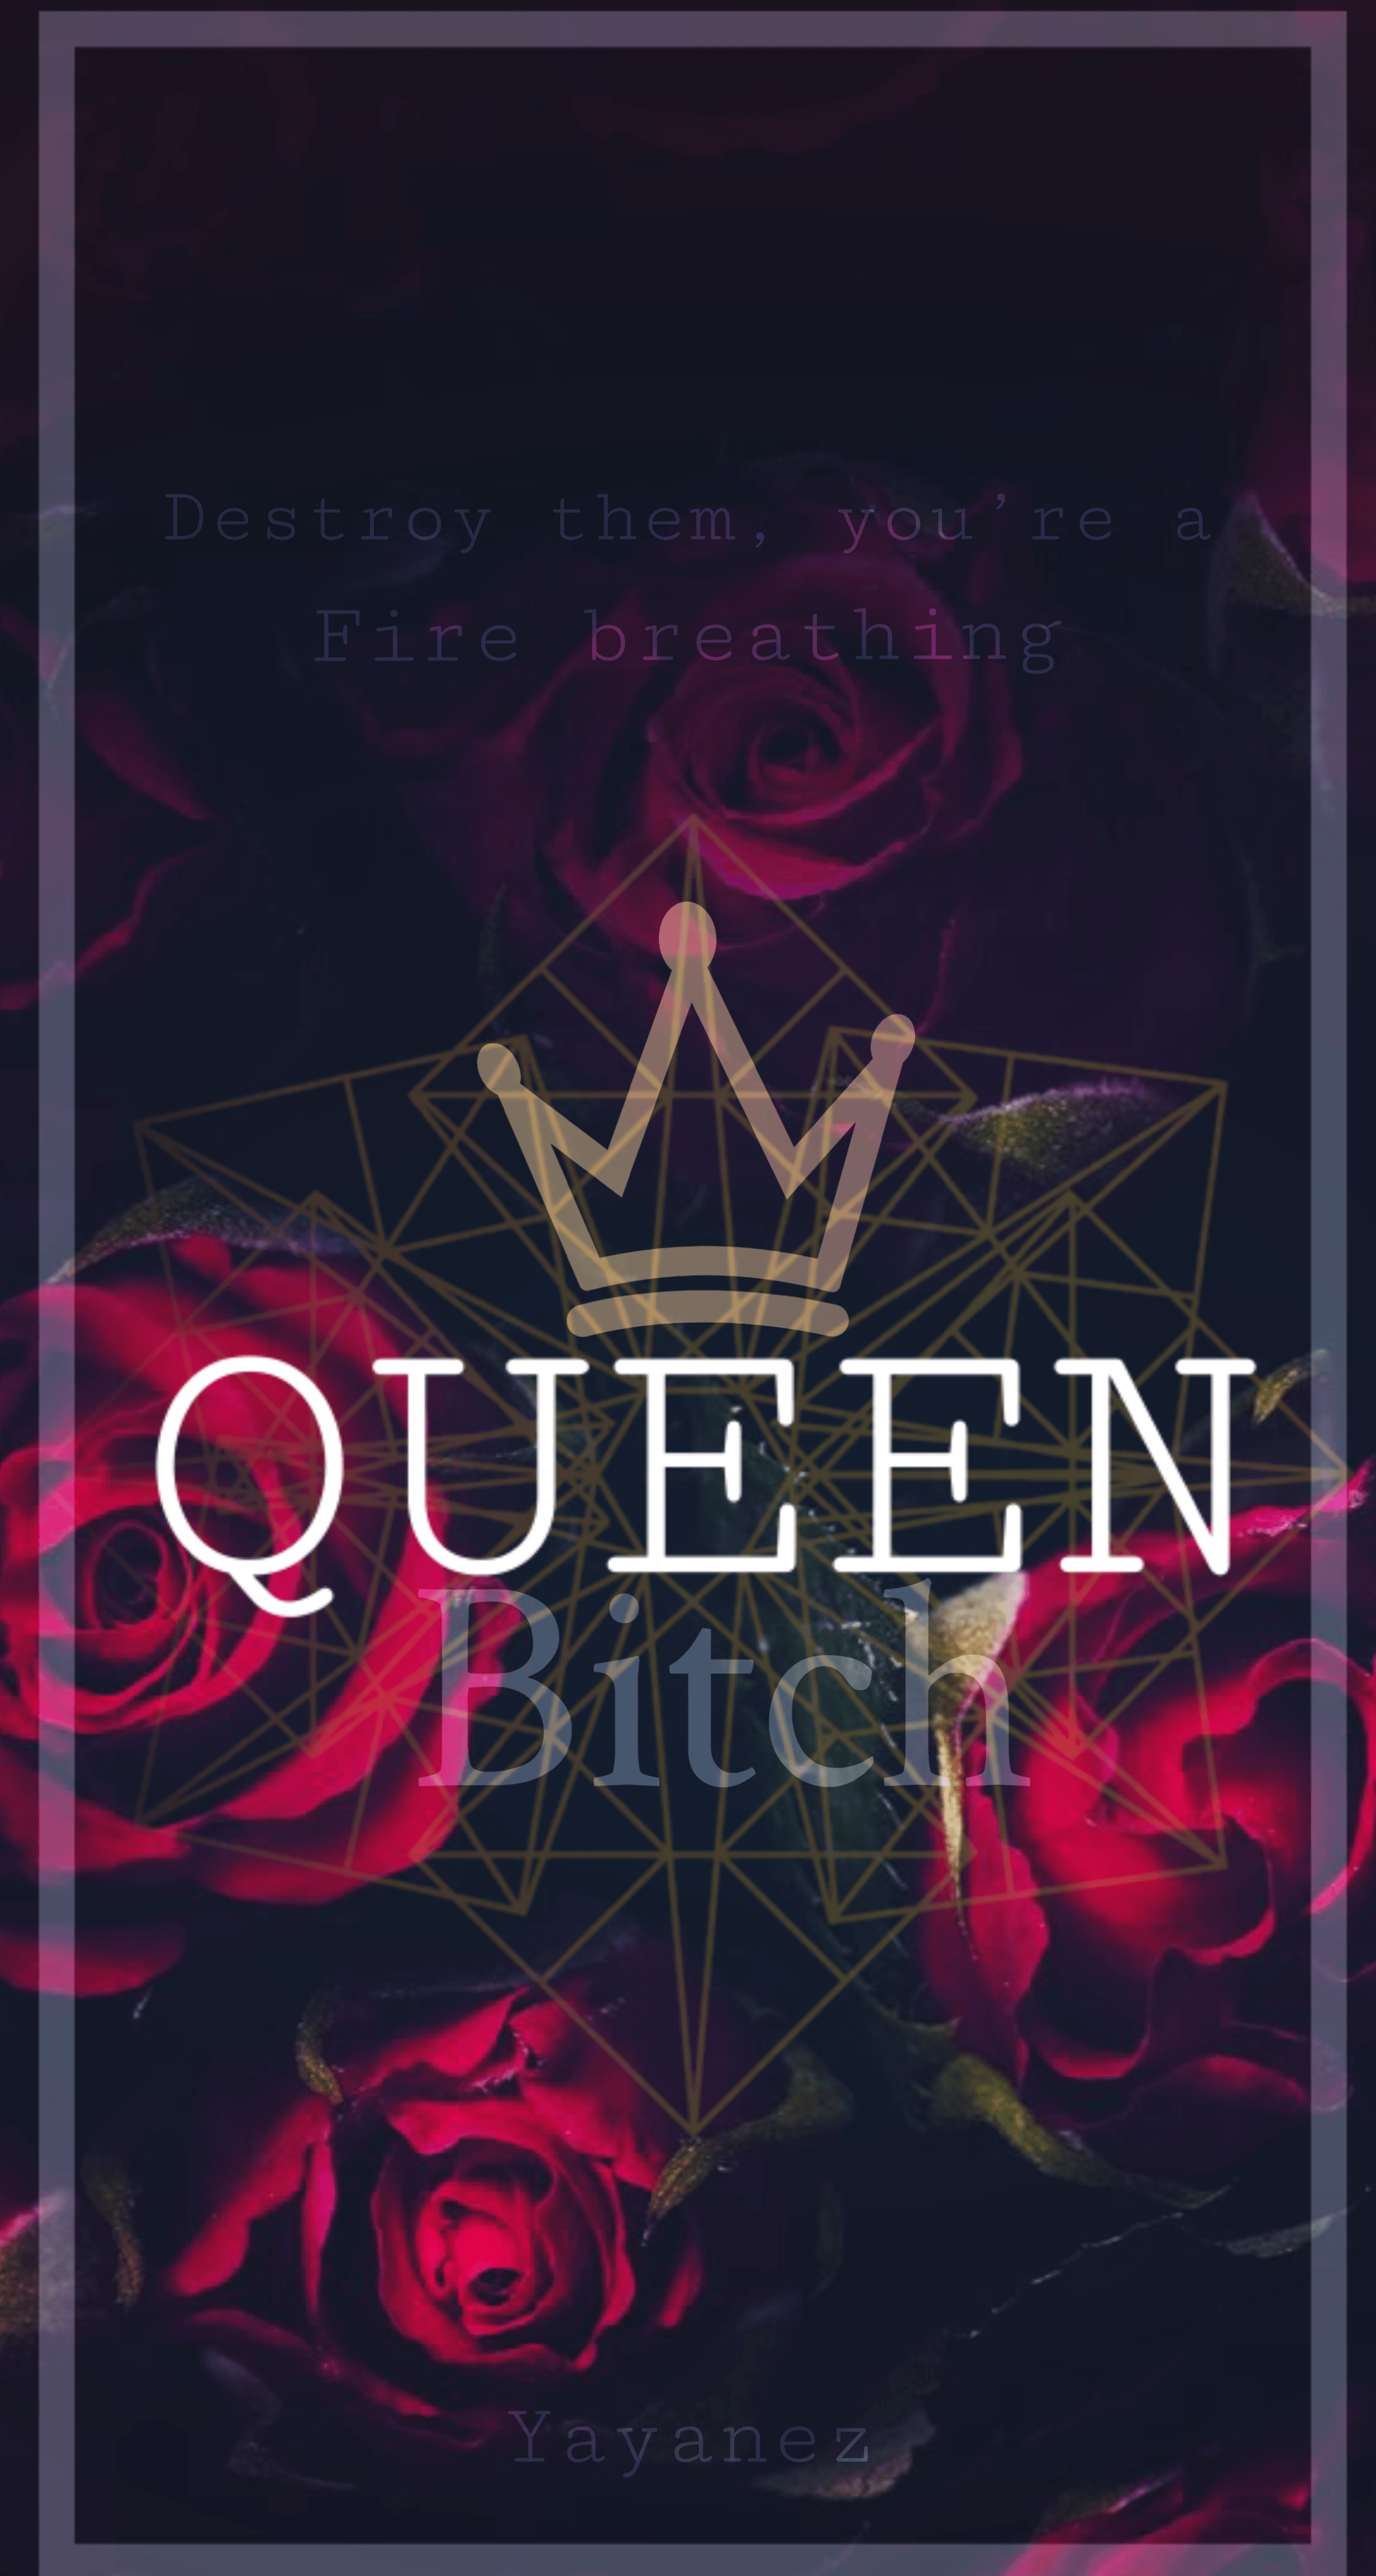 Made by me. #queen #wallpaper #iphone #bitch #cocky #offensive